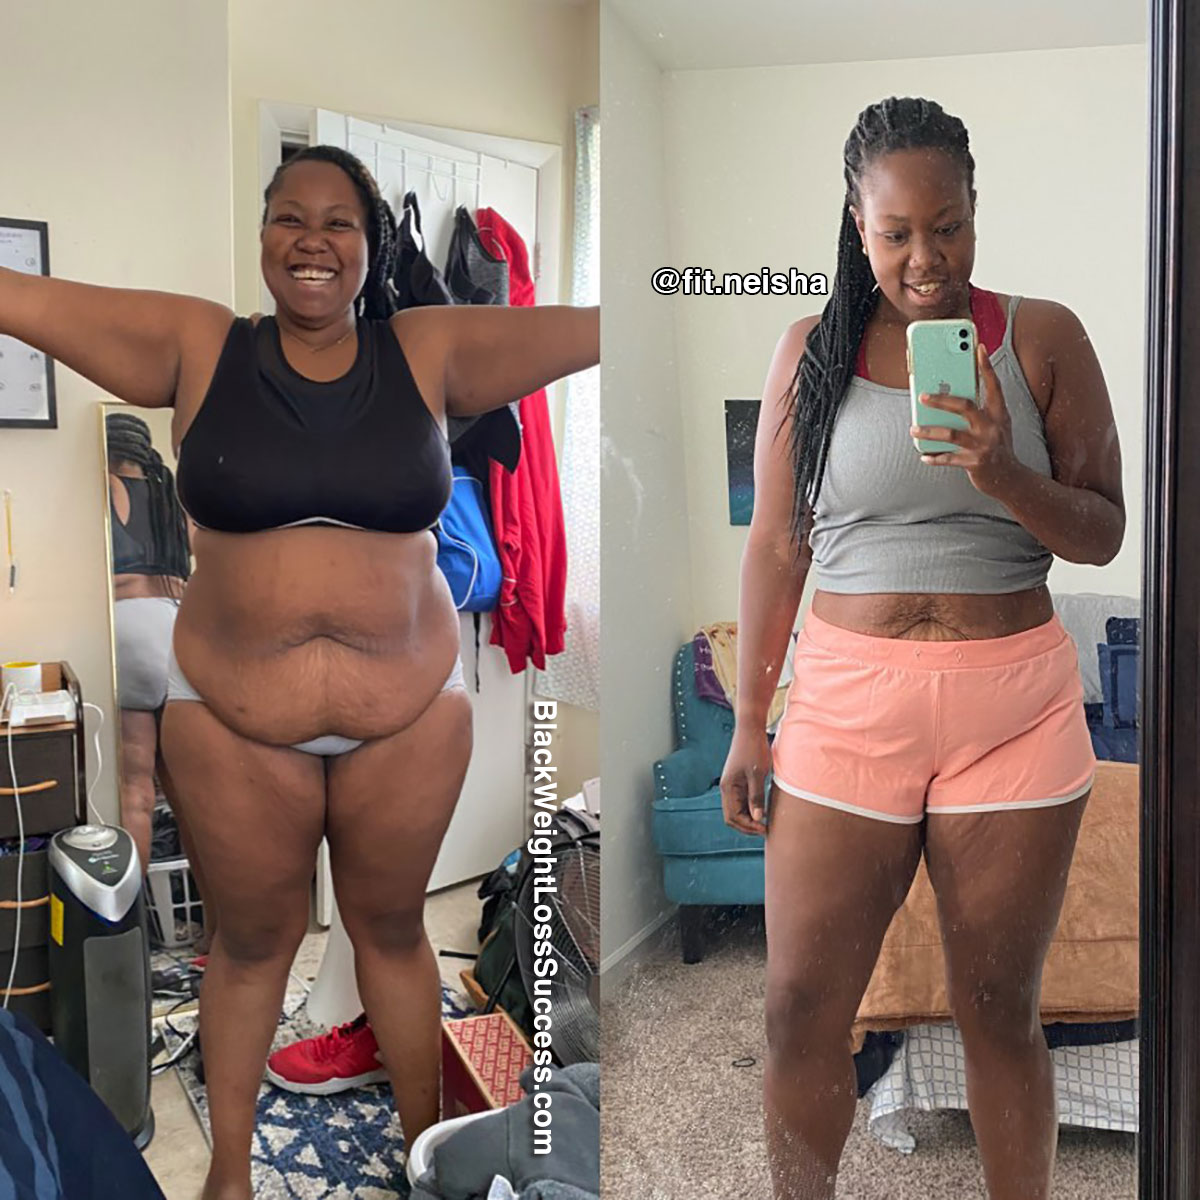 Neisha before and after weight loss